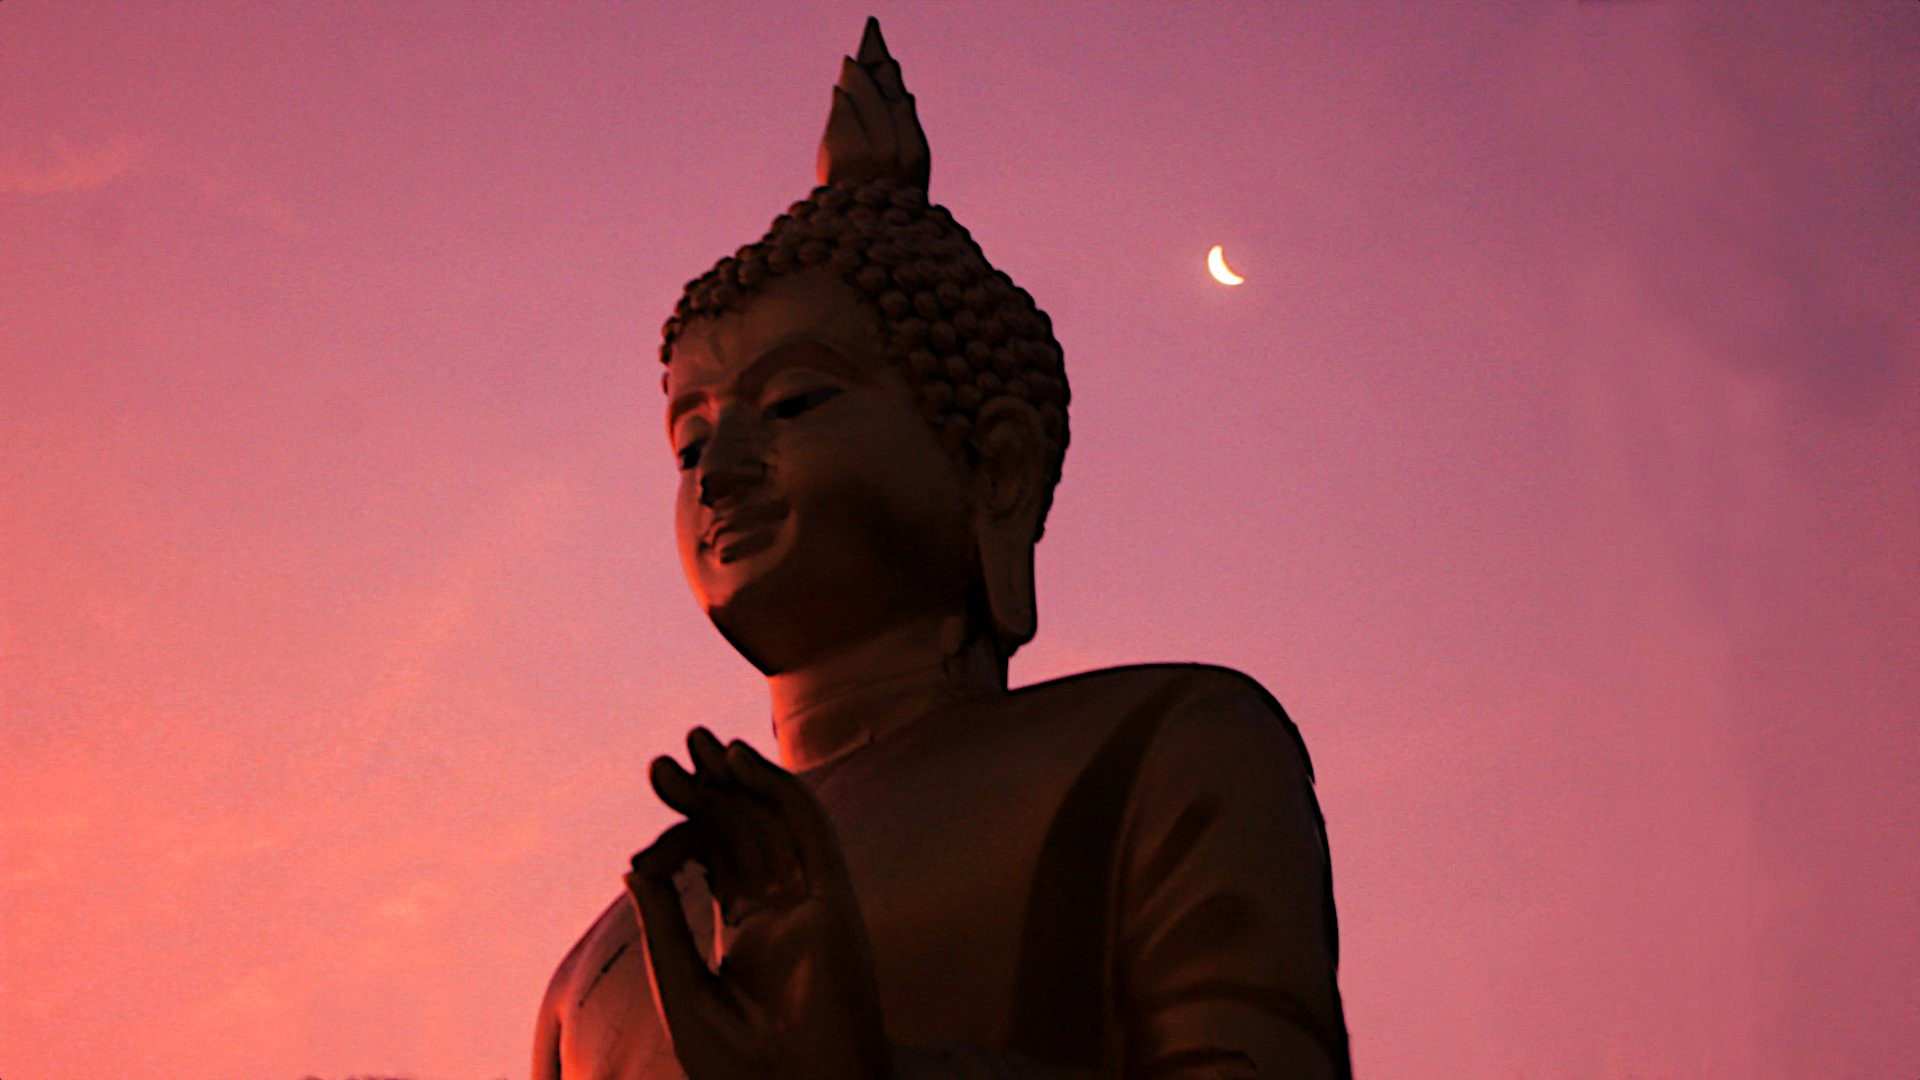 The Buddha and a crescent moon